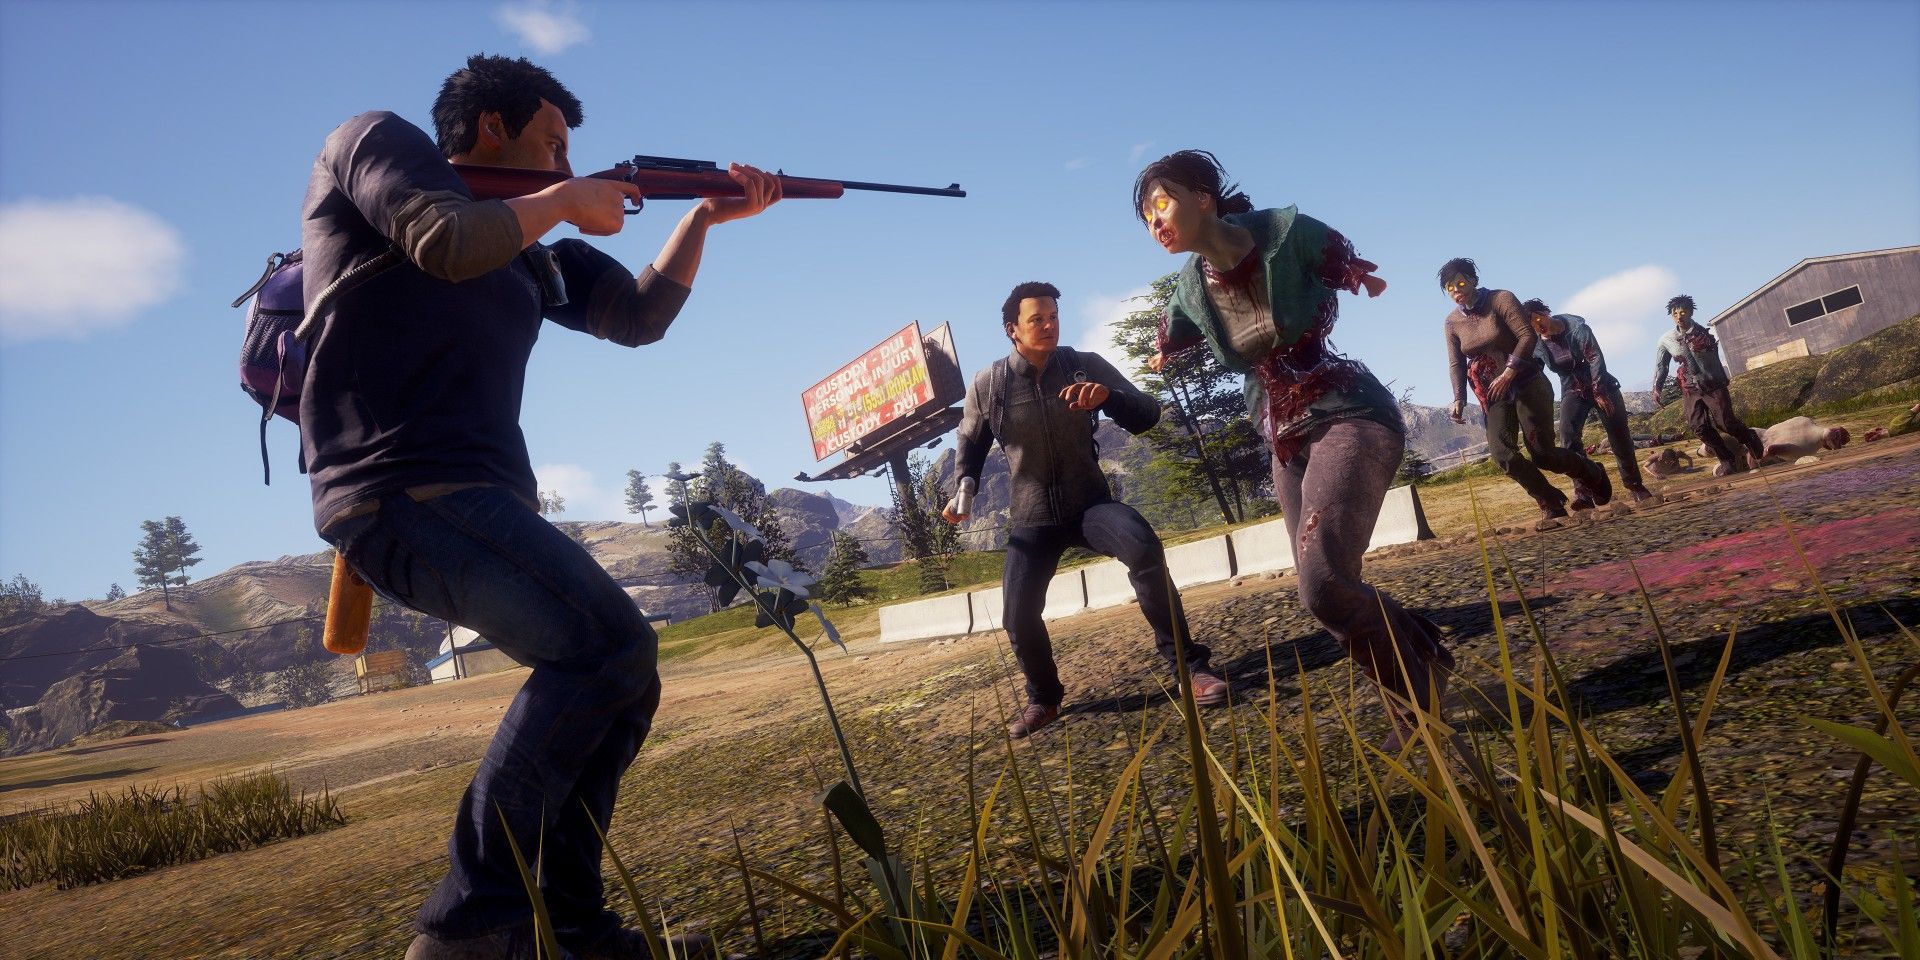 Latest 'State of Decay 2' Update Adds Extra Control Support For